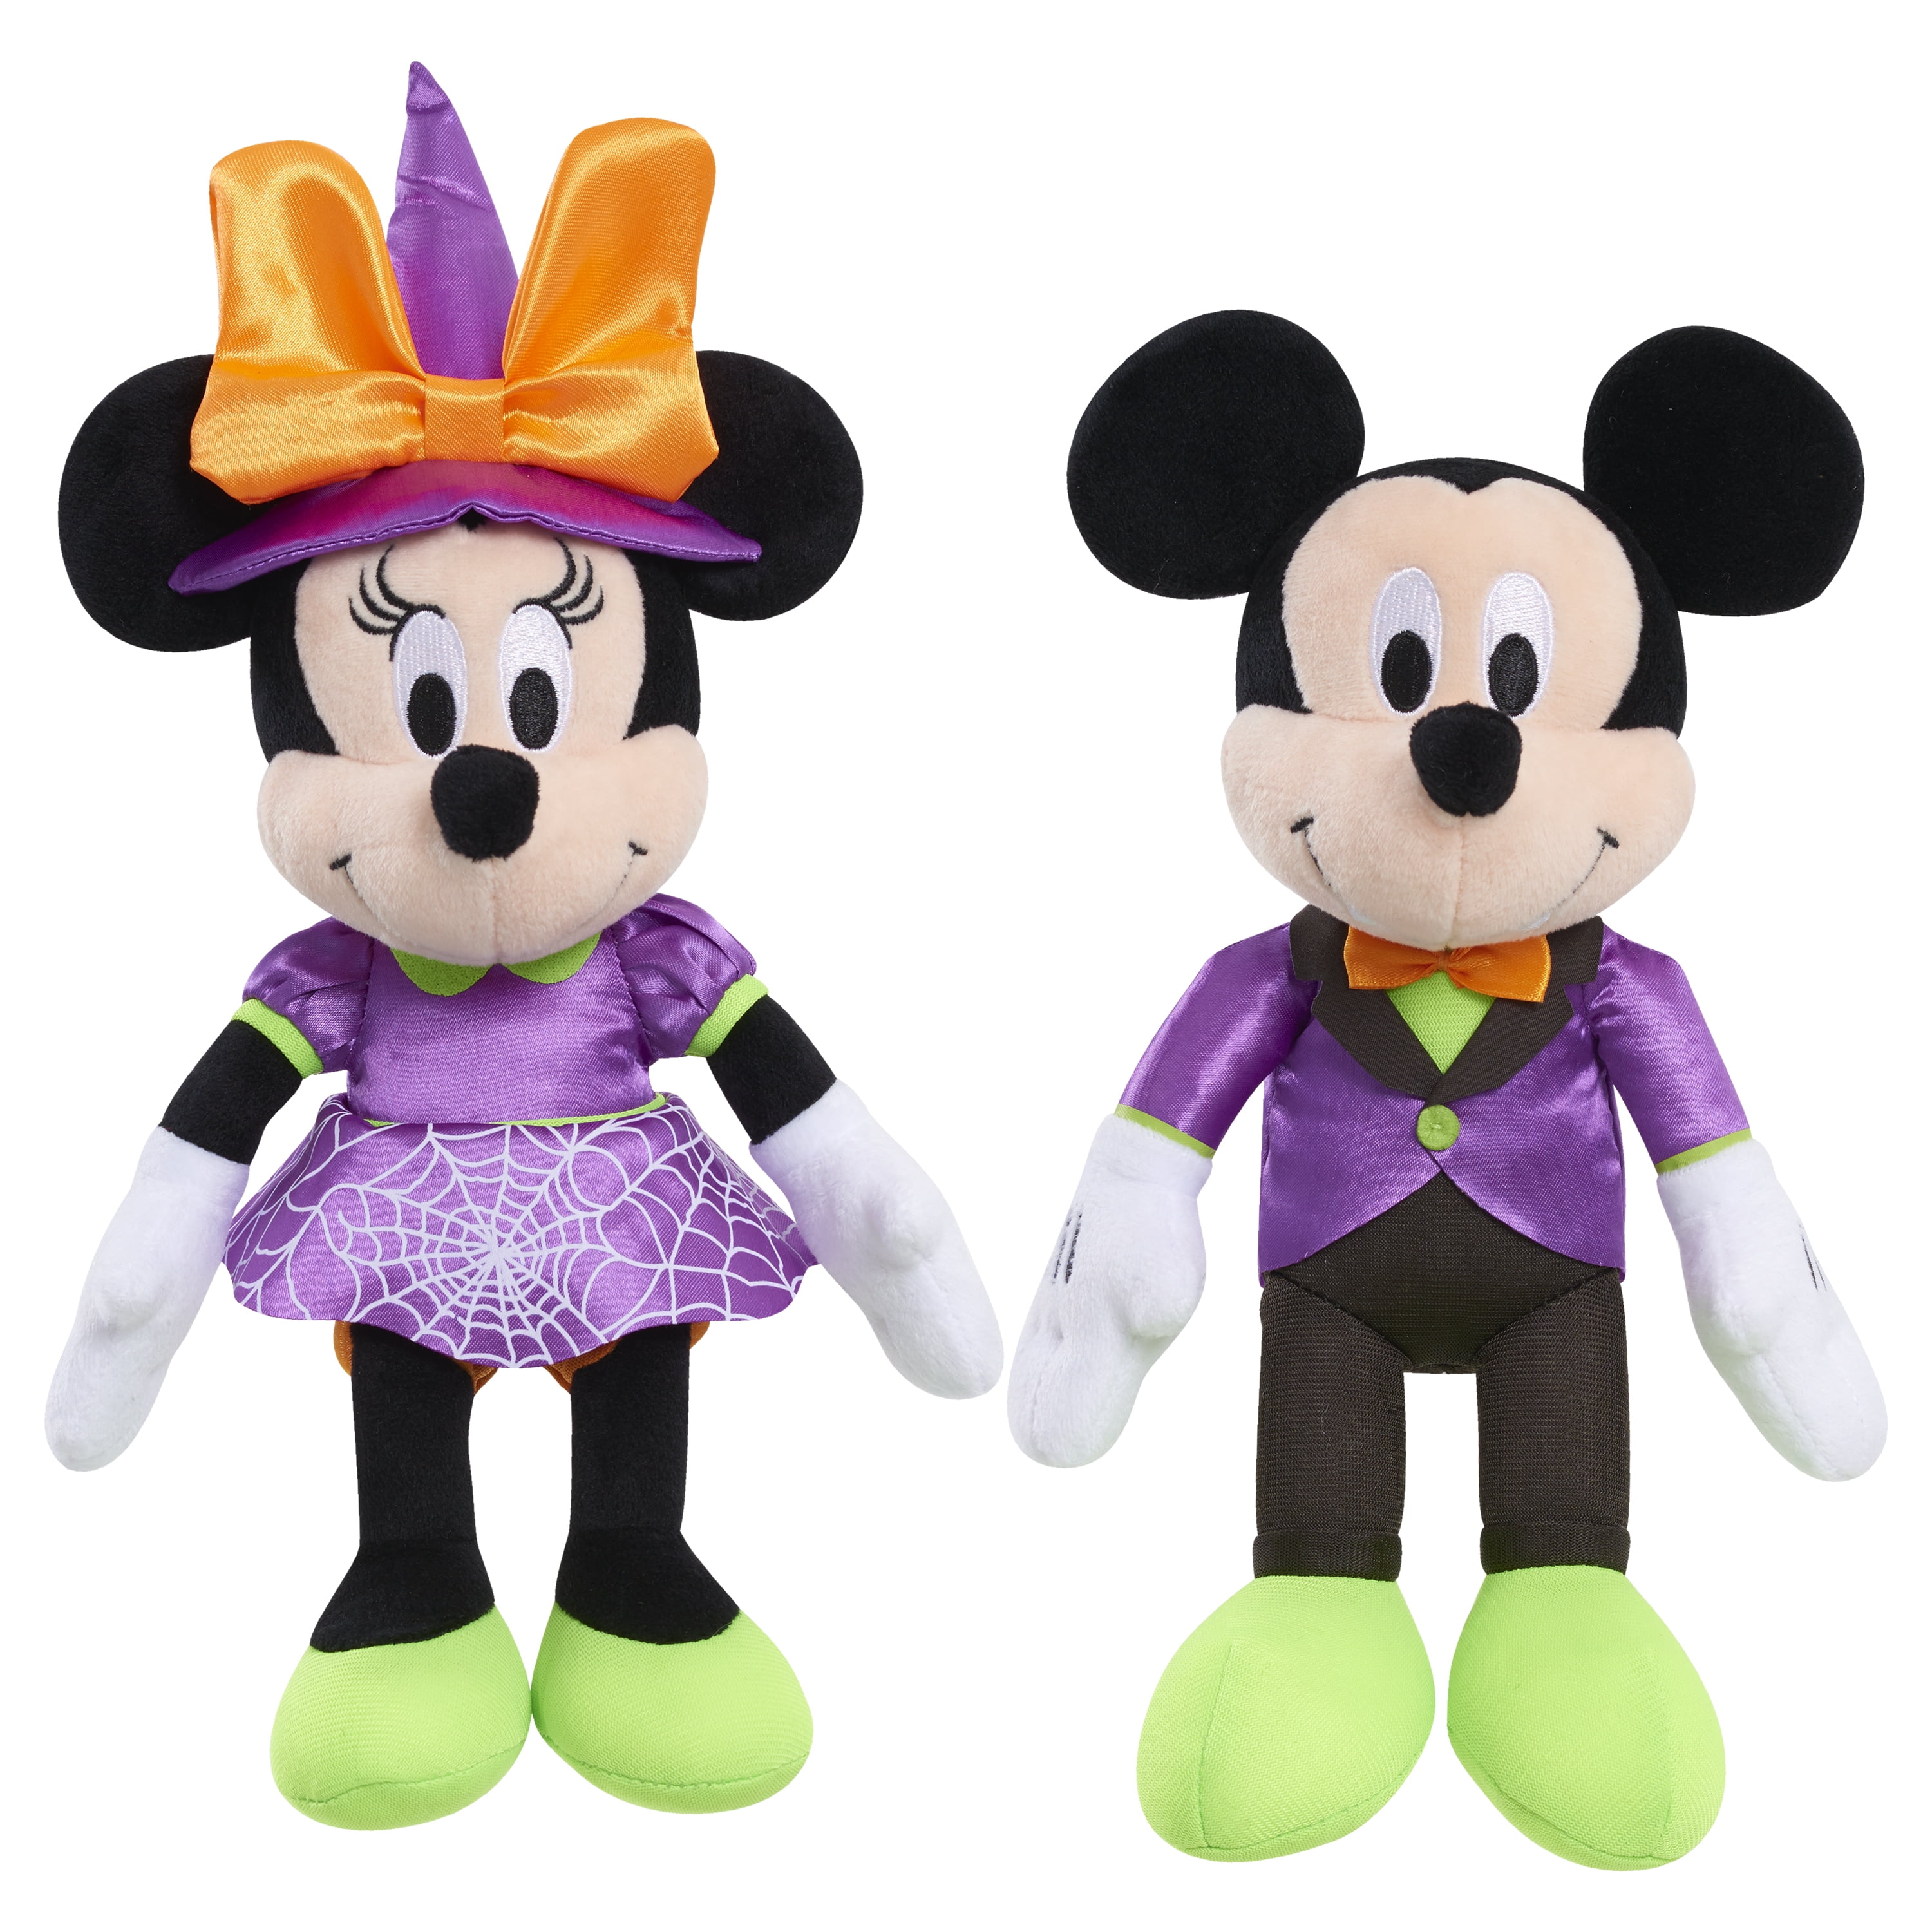 Vampire Mickey And Witch Minnie 8 Inch Squishmallows Hallmark New In Hand!! 